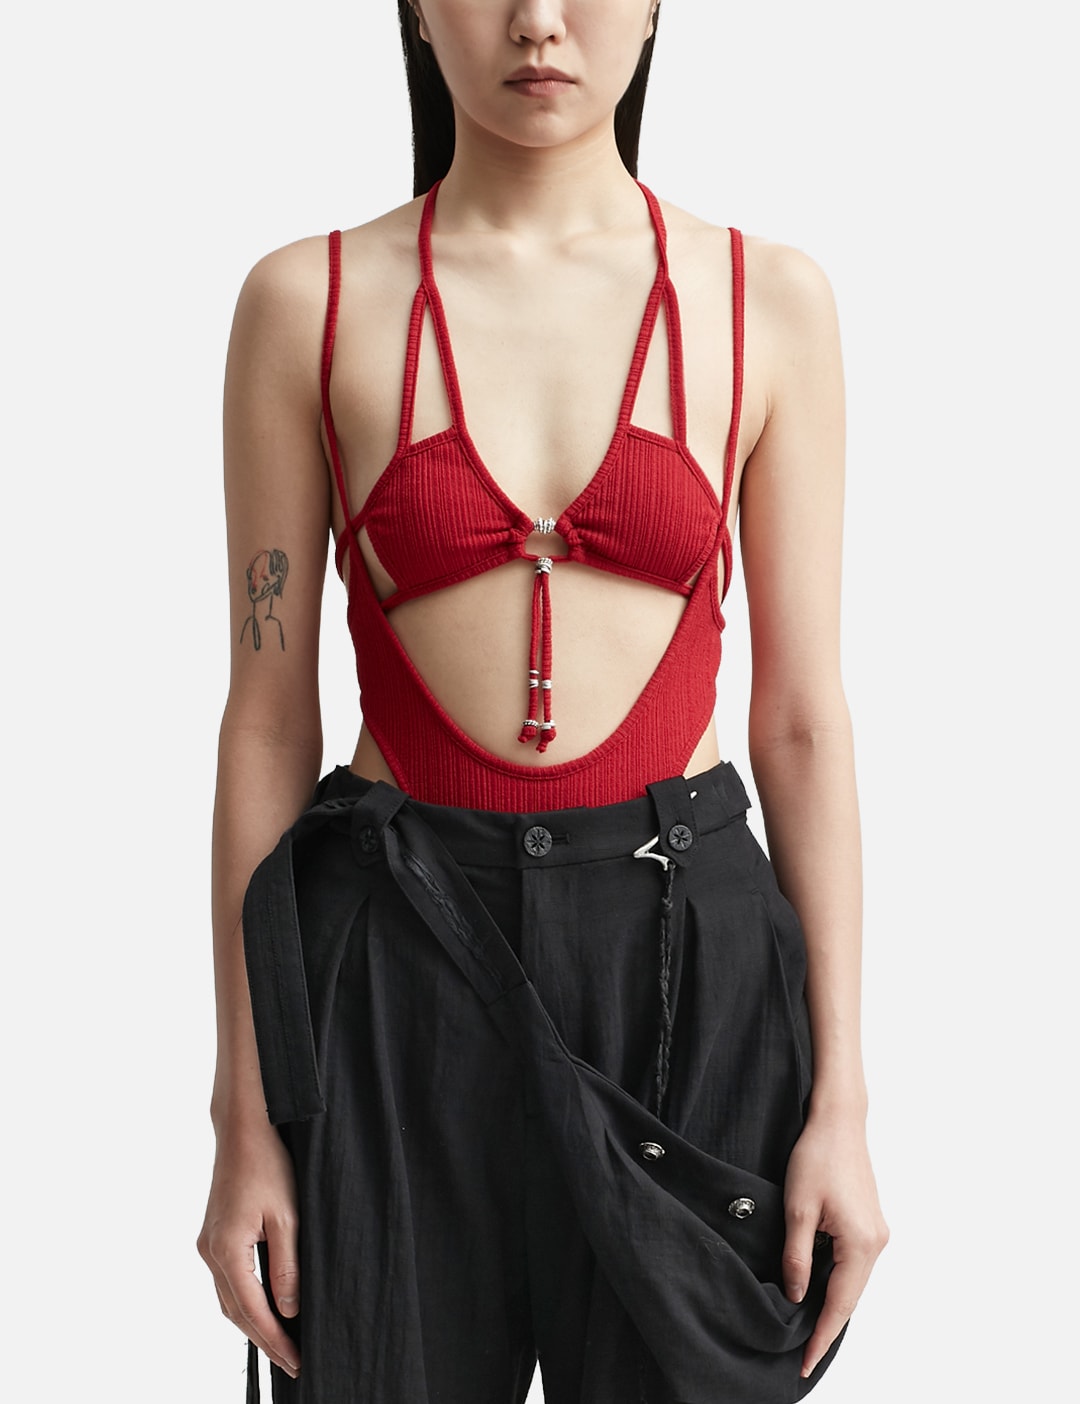 Hyein Seo - THERMAL TUBE TOP  HBX - Globally Curated Fashion and